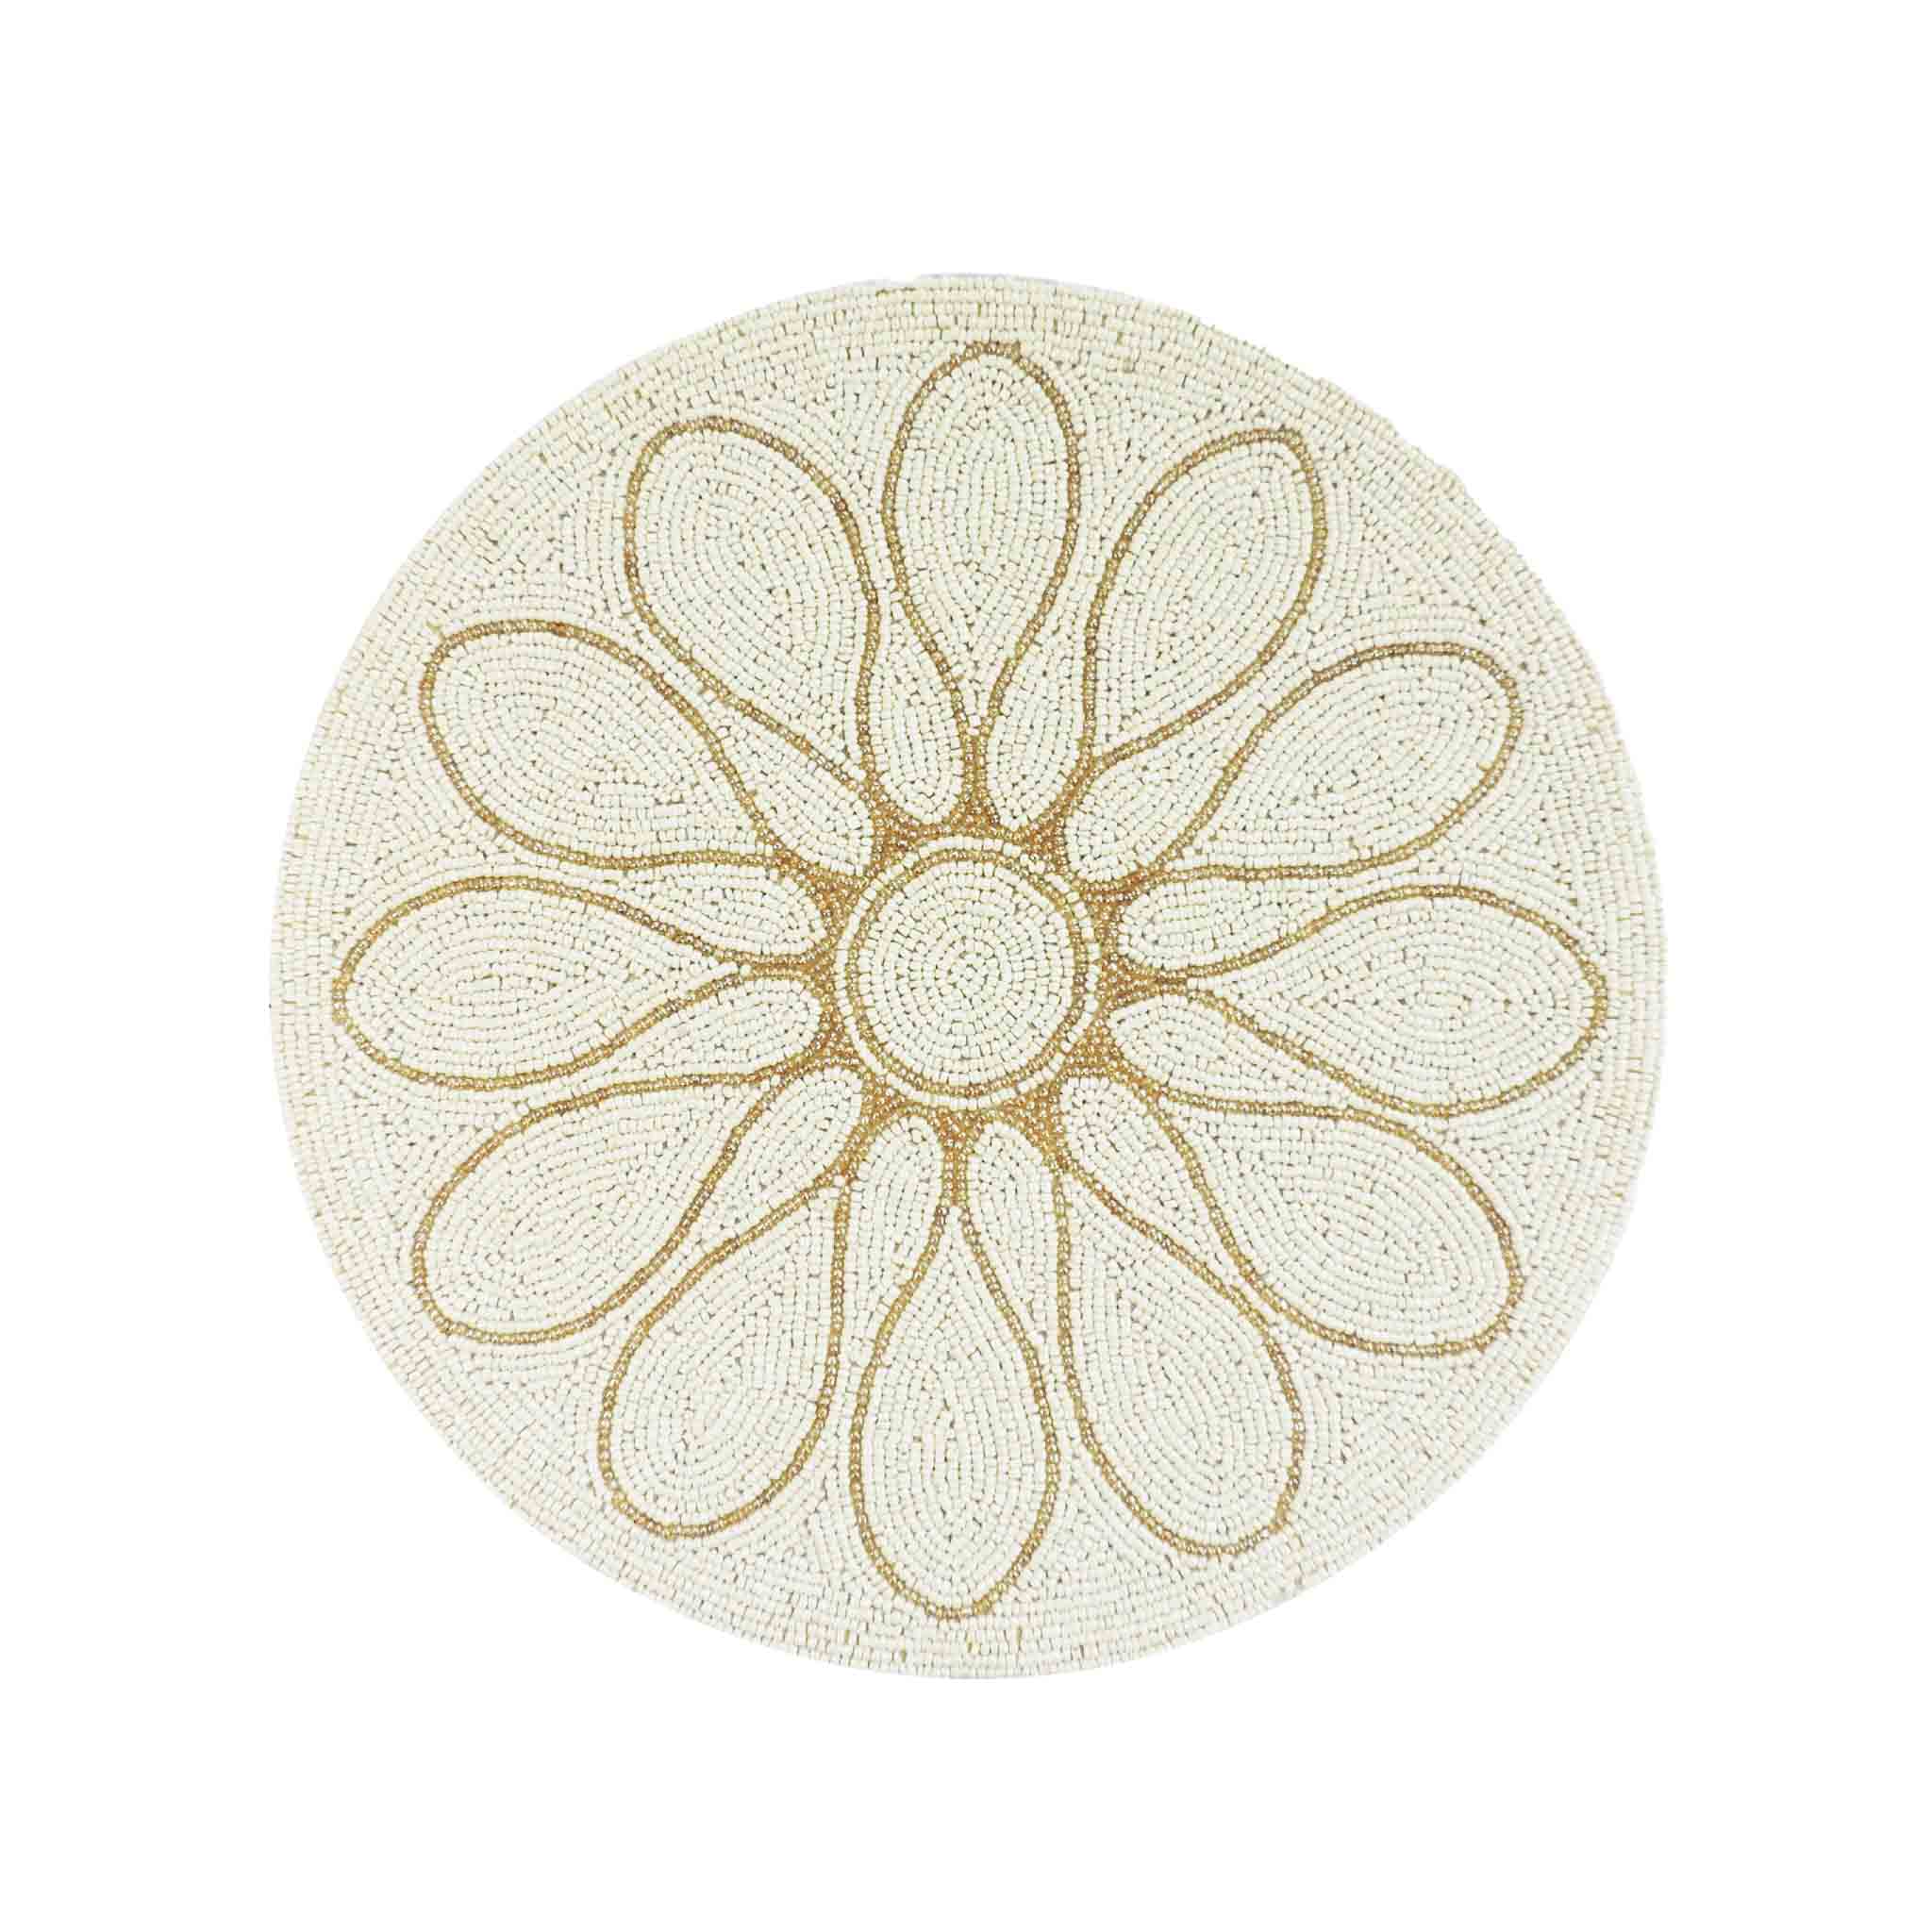 Petal Impressions Bead Embroidered Placemat<br>Color: Cream <br>Size: 14" Round<br>Set of 2